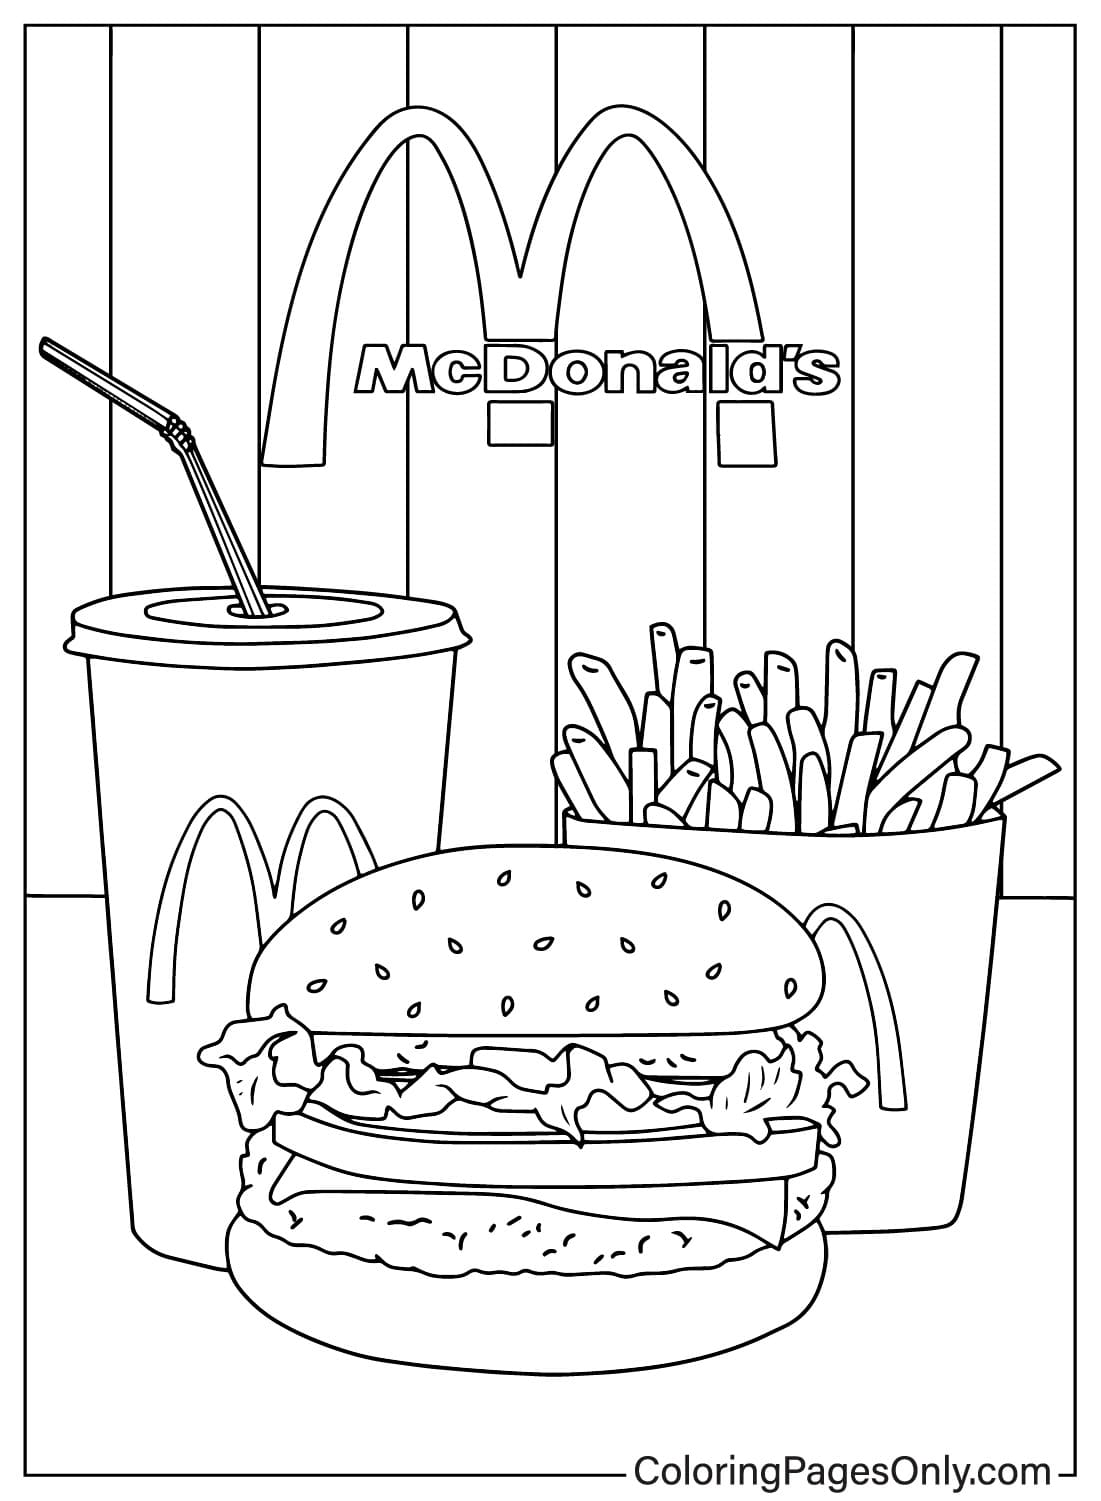 Images McDonalds Coloring Page from McDonald's